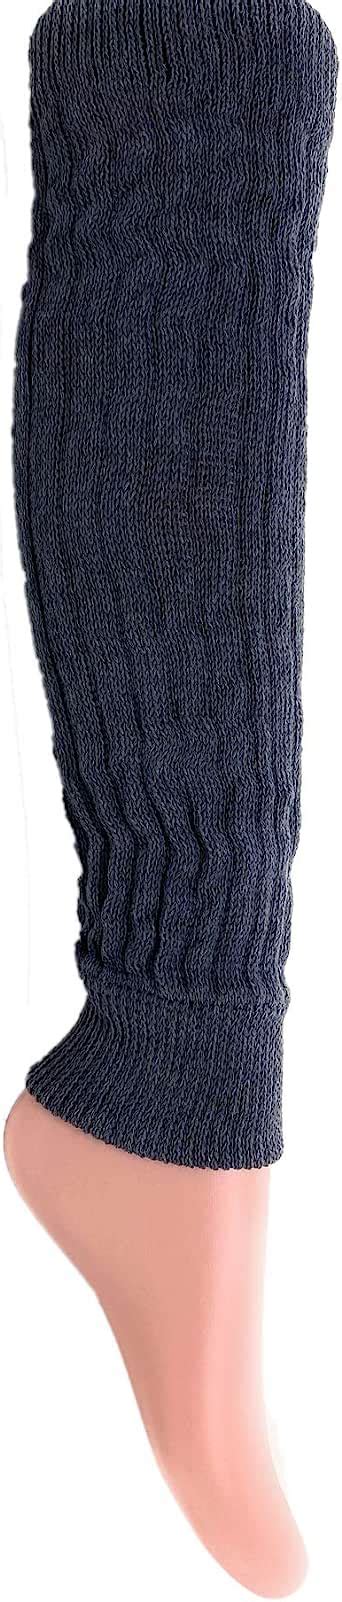 Cotton Leg Warmers Knitted Retro Adult Unisex Anthracite